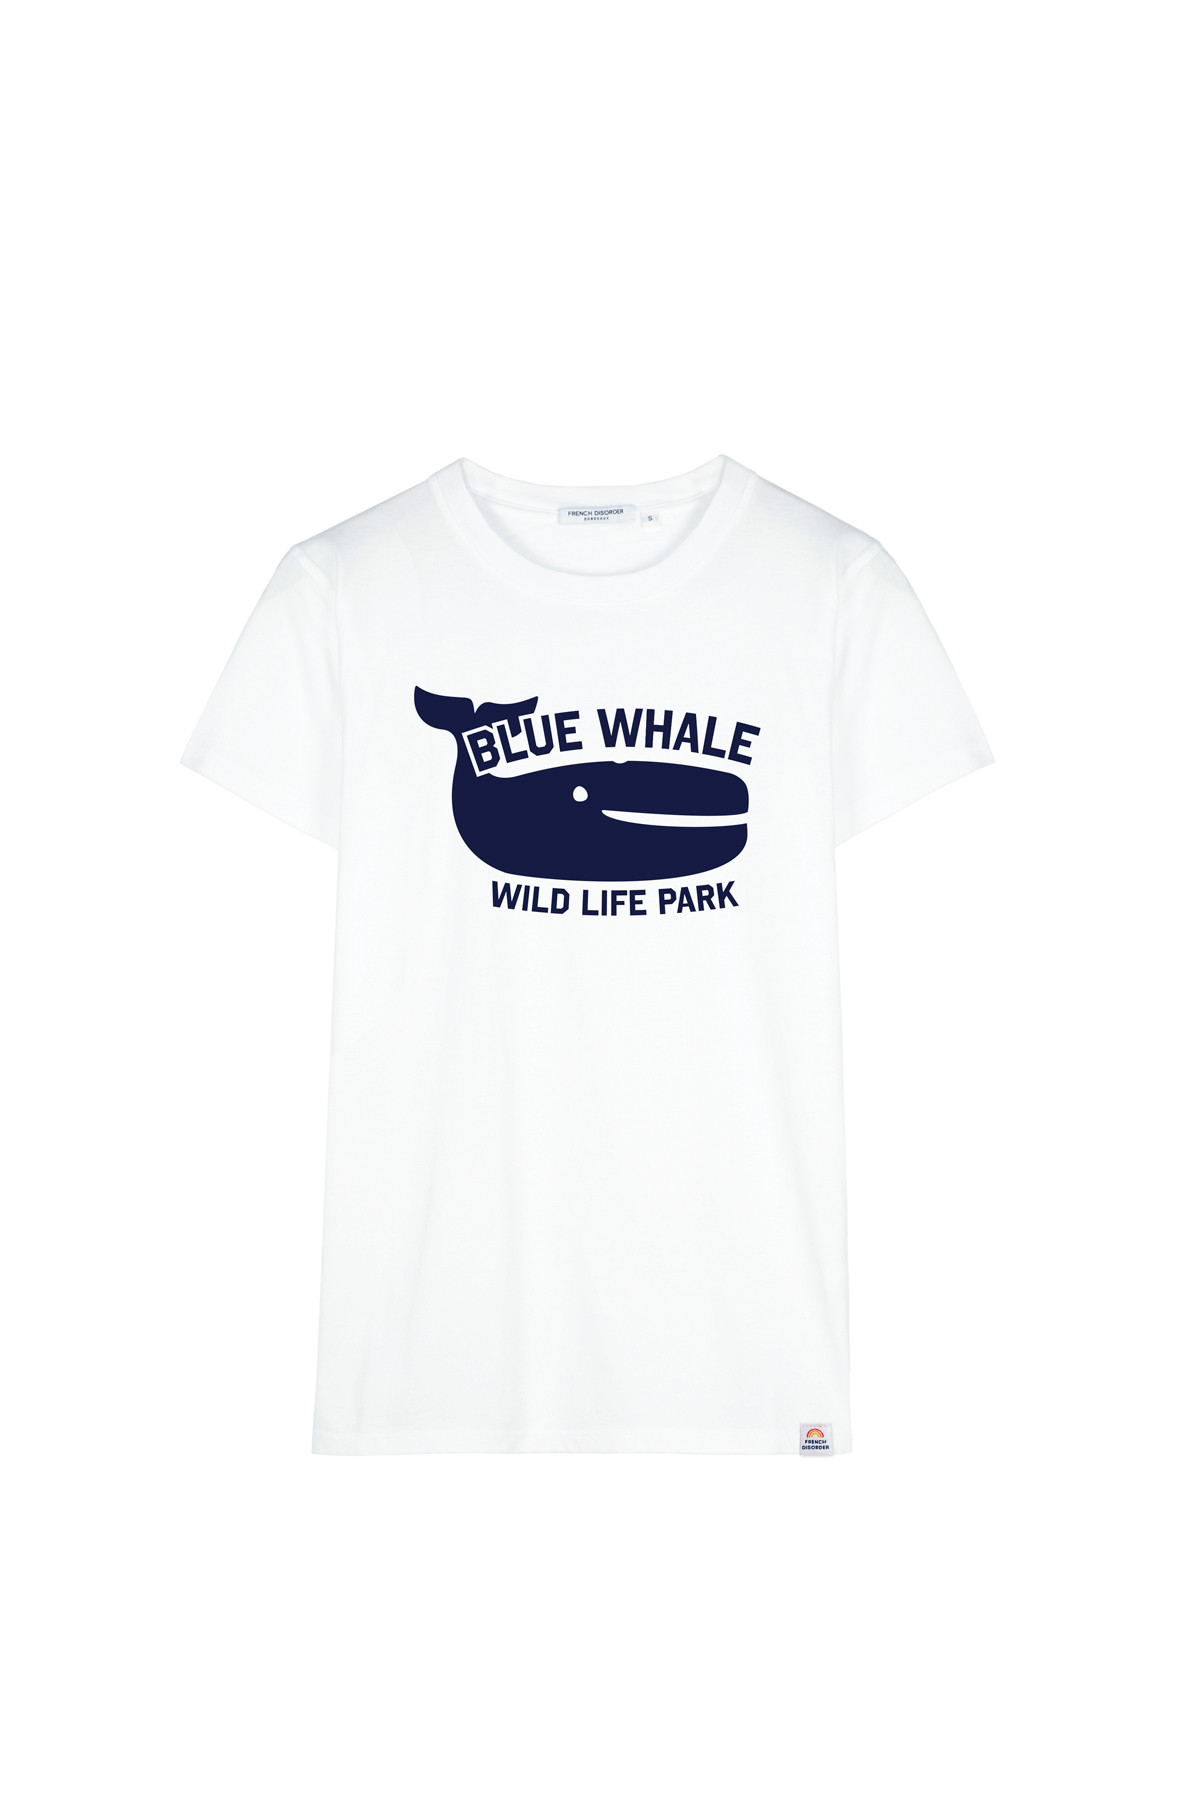 Tshirt BLUE WHALE French Disorder